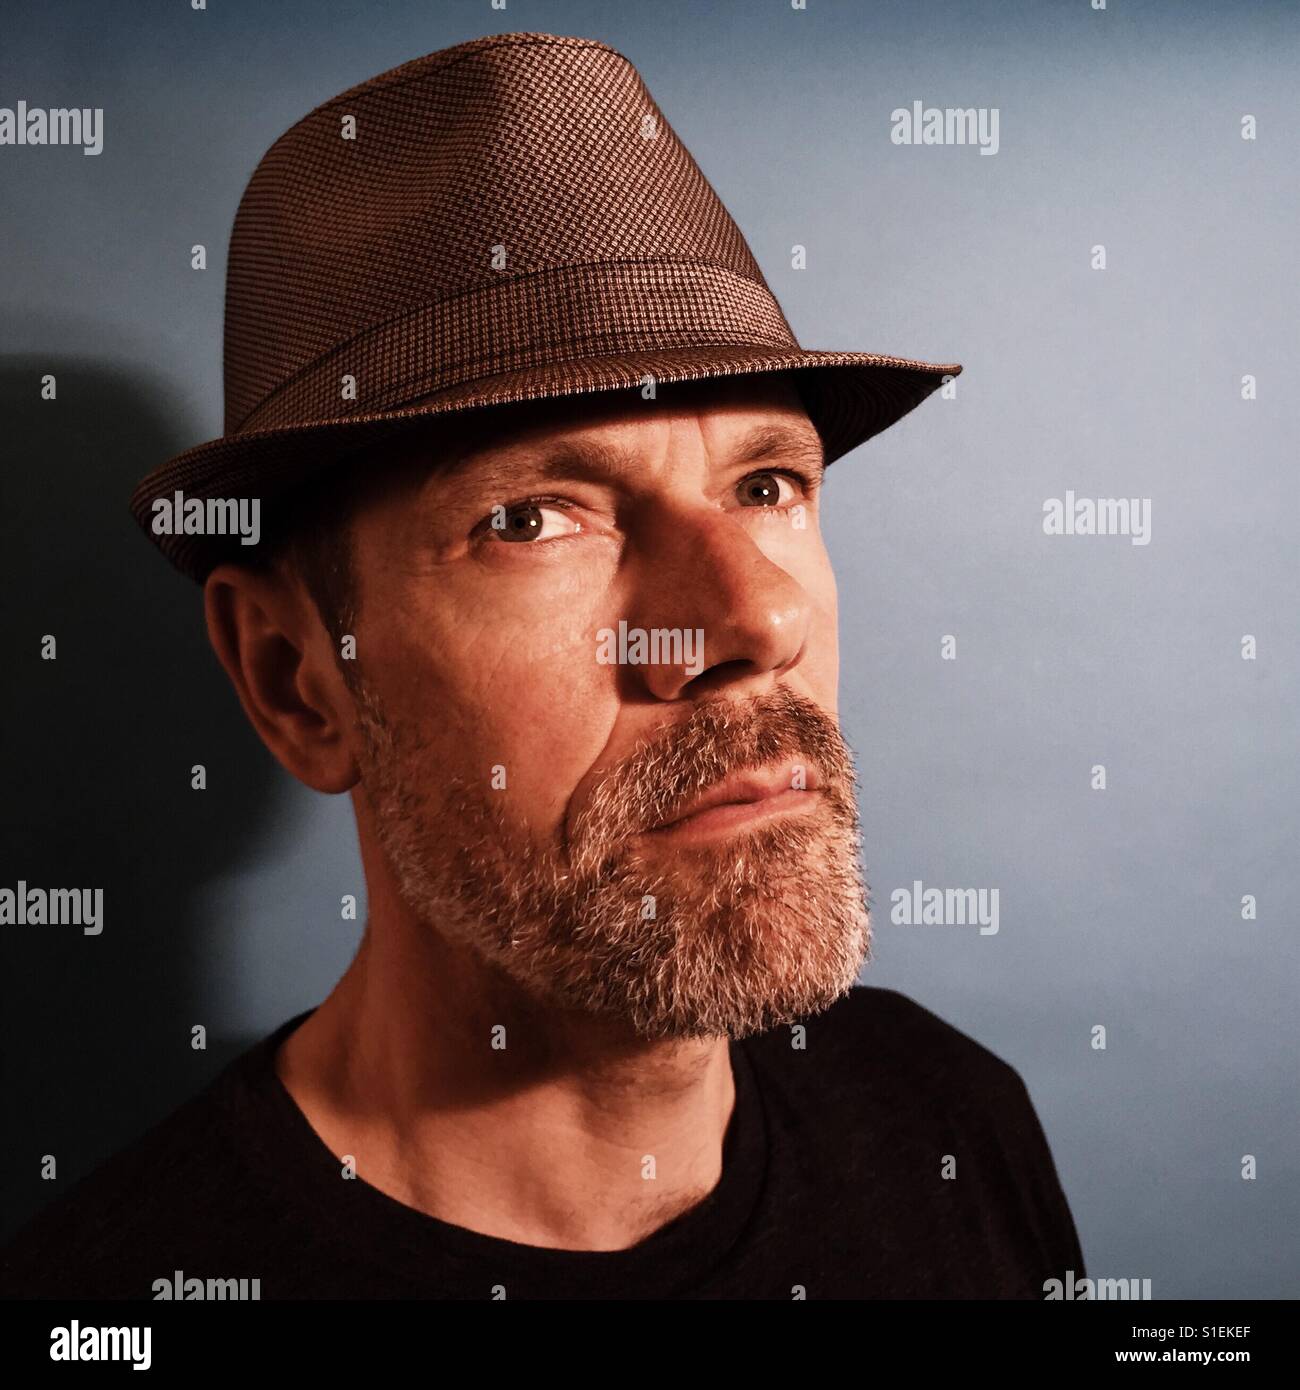 A close-up portrait of a 40 something male wearing a fedora and shot against a blue background. Stock Photo